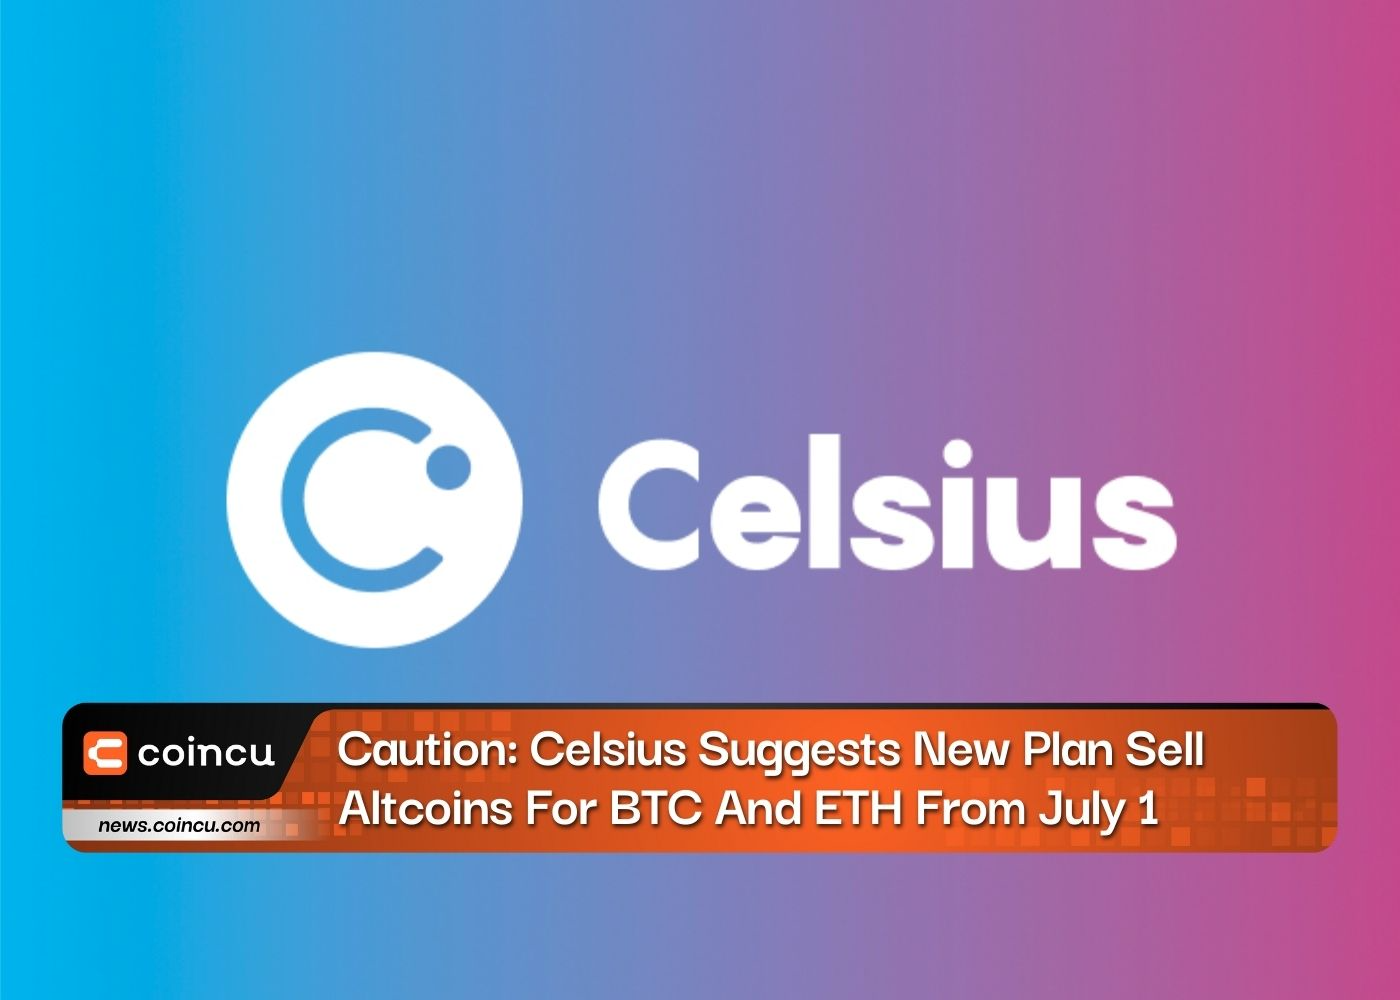 Caution: Celsius Suggests New Plan Sell Altcoins For BTC And ETH From July 1